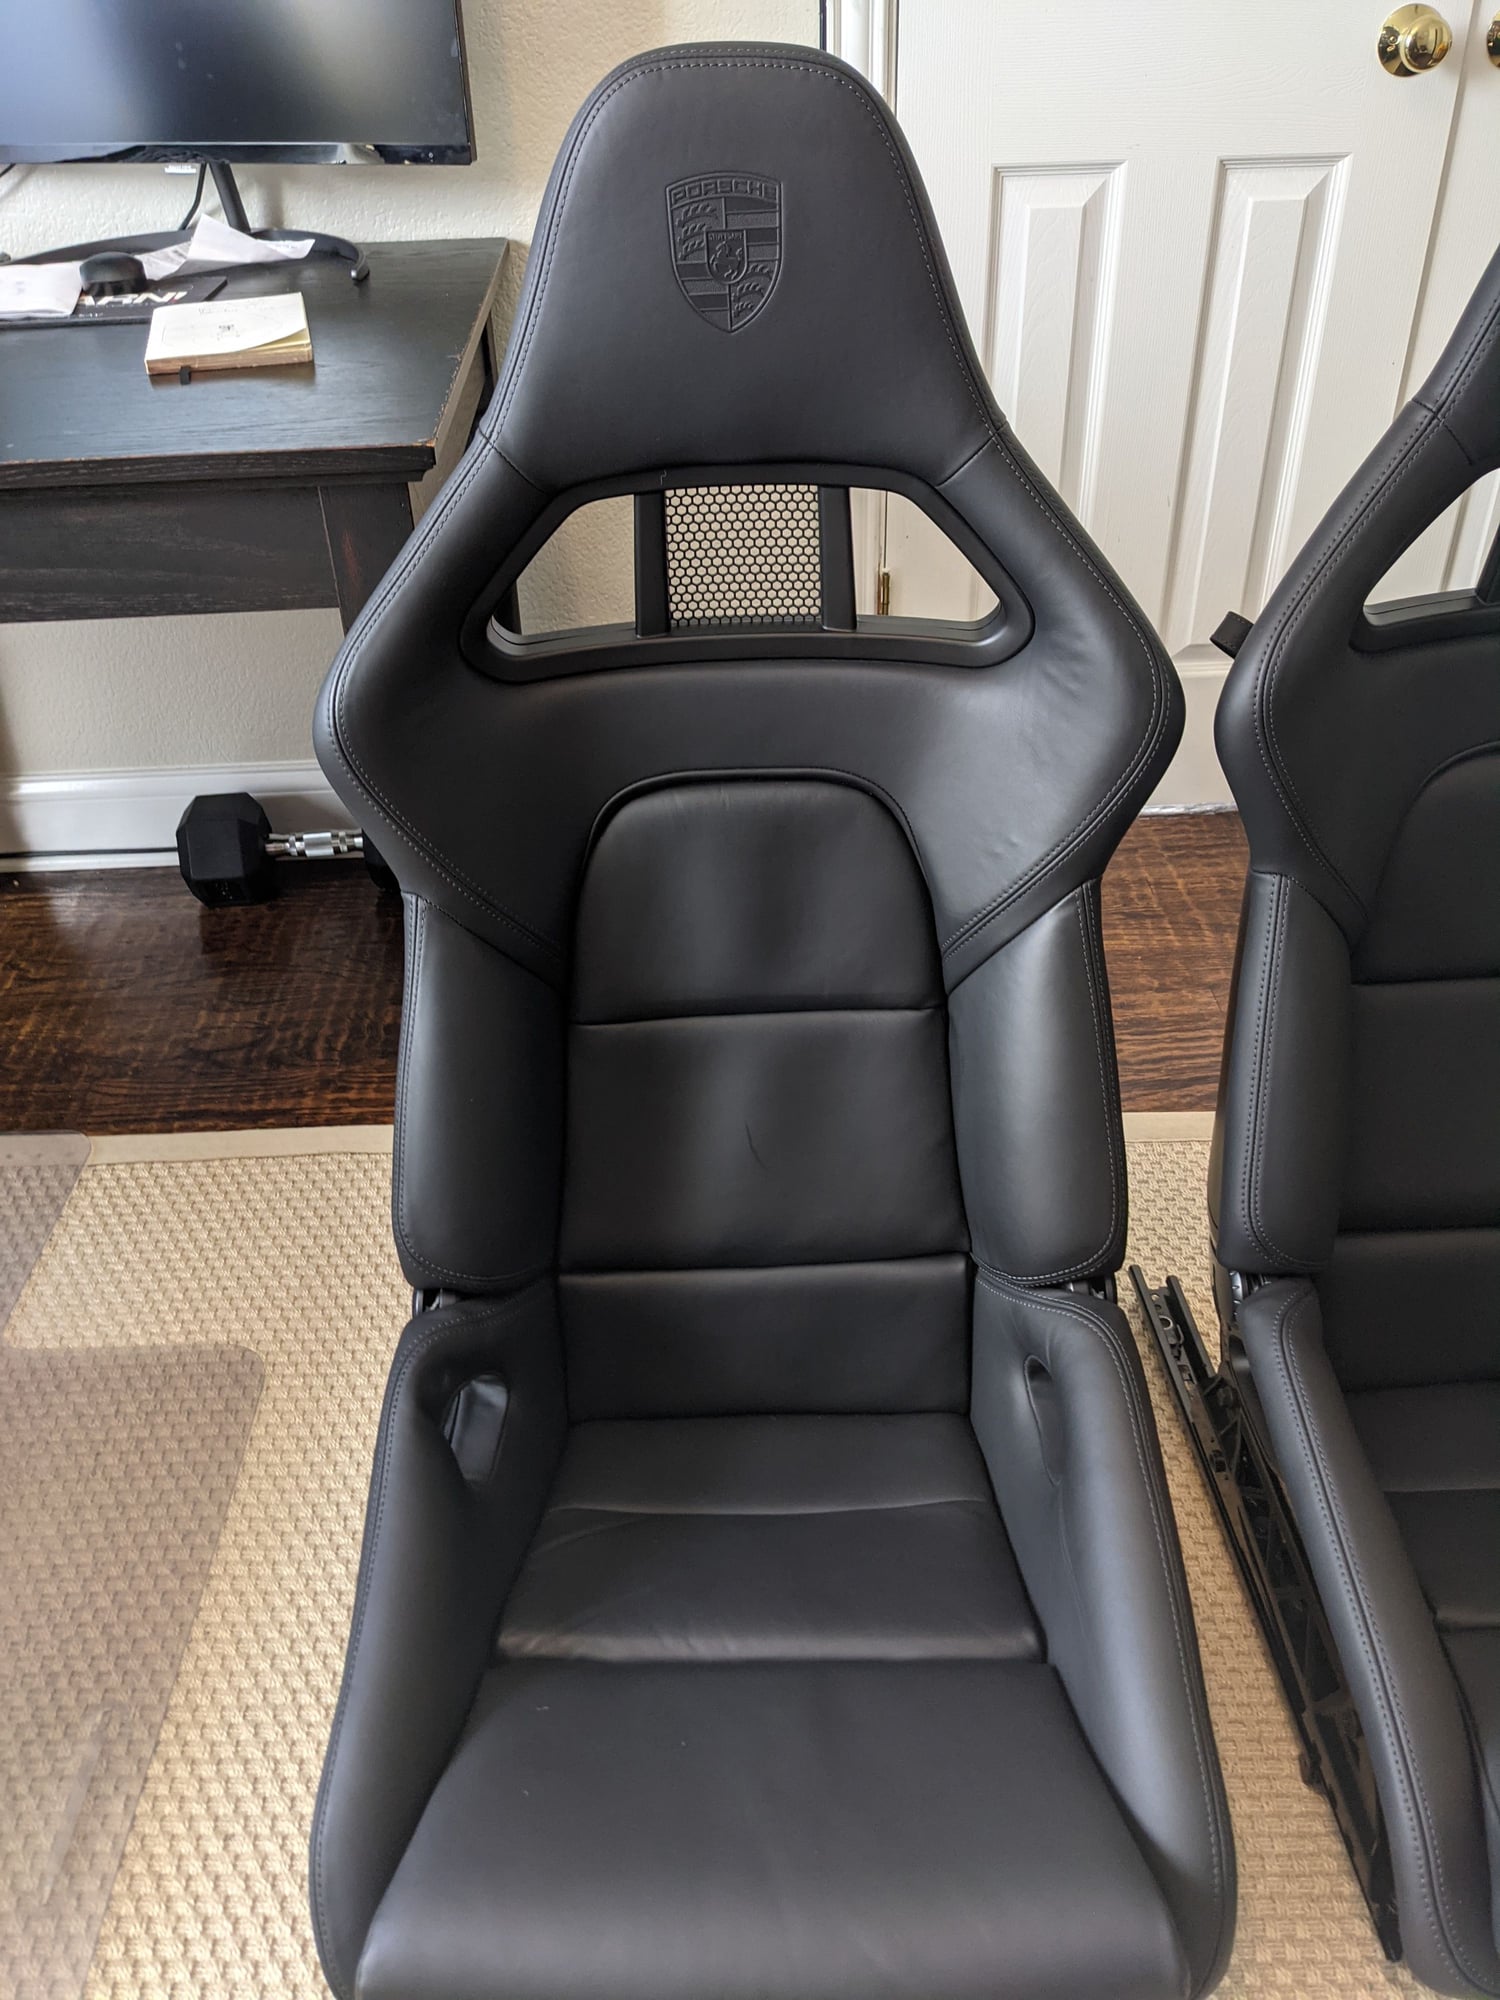 Interior/Upholstery - GT2/ GT3 Lightweight Bucket seats - Used - 2007 to 2011 Porsche 911 - Plano, TX 75024, United States